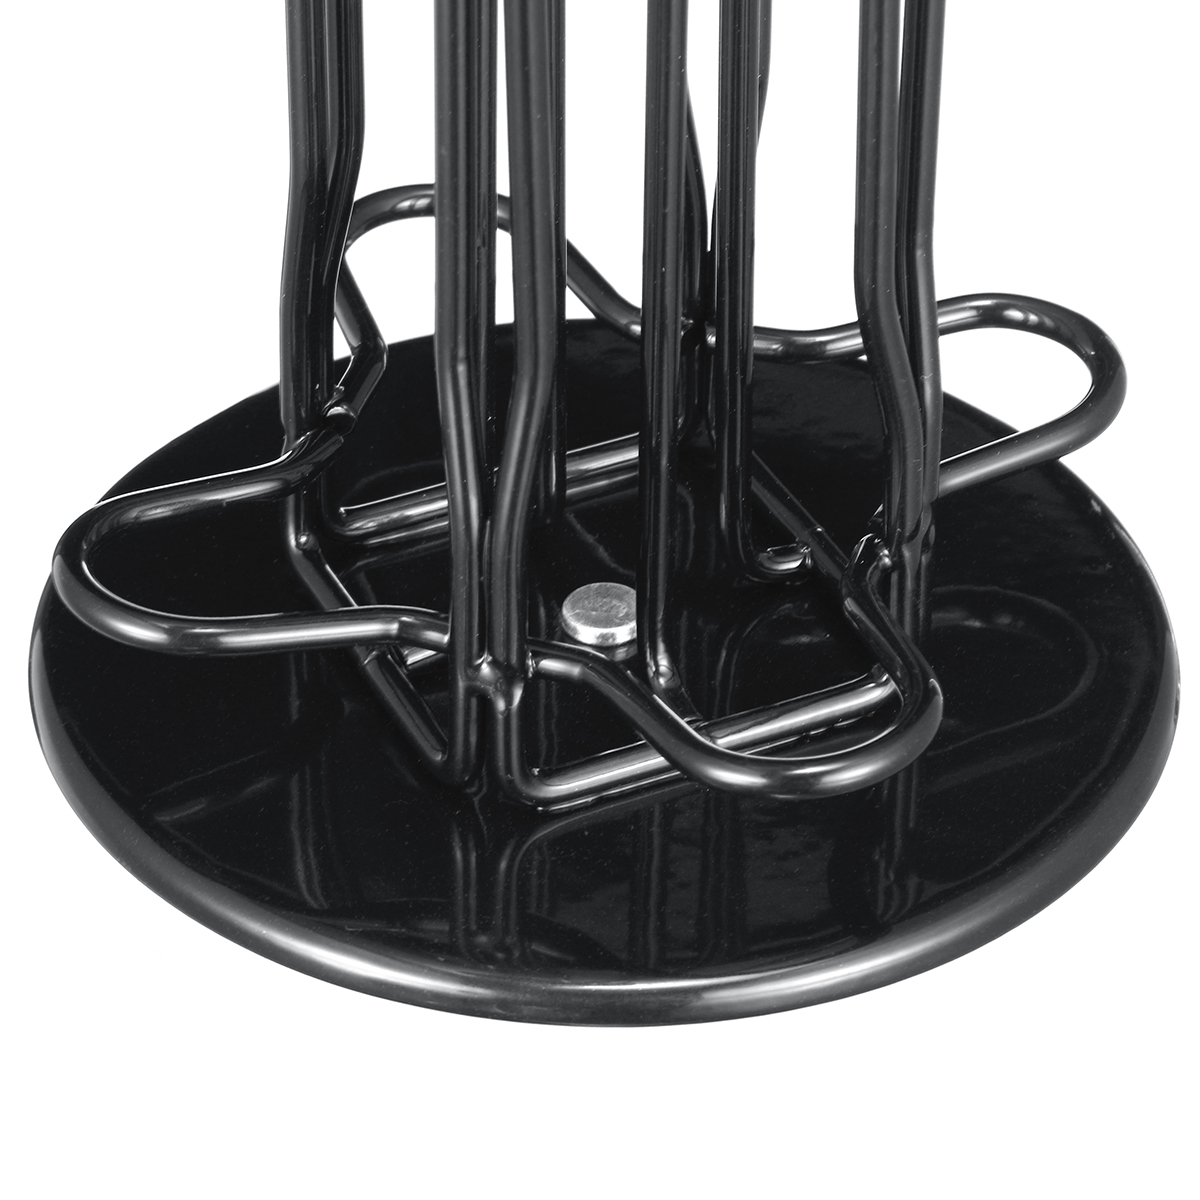 40pcs-Capacity-Coffee-Capsule-Cup-Holder-Storage-Stand-Chrome-Tower-Mount-Rack-for-Nespresso-1302799-6